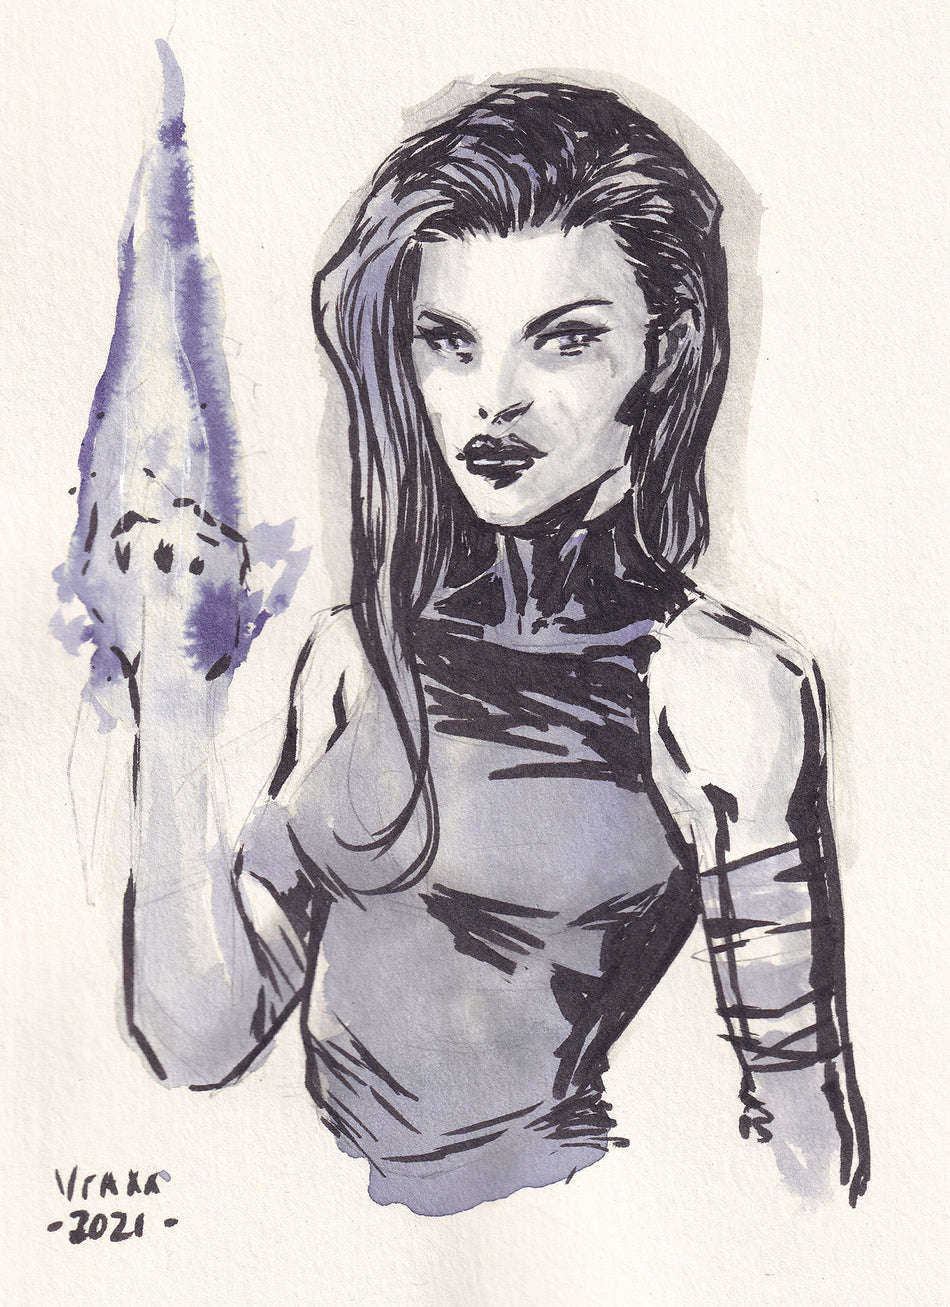 Psylocke - 5" x 7" - Original Art sold by Stronghold Collectibles